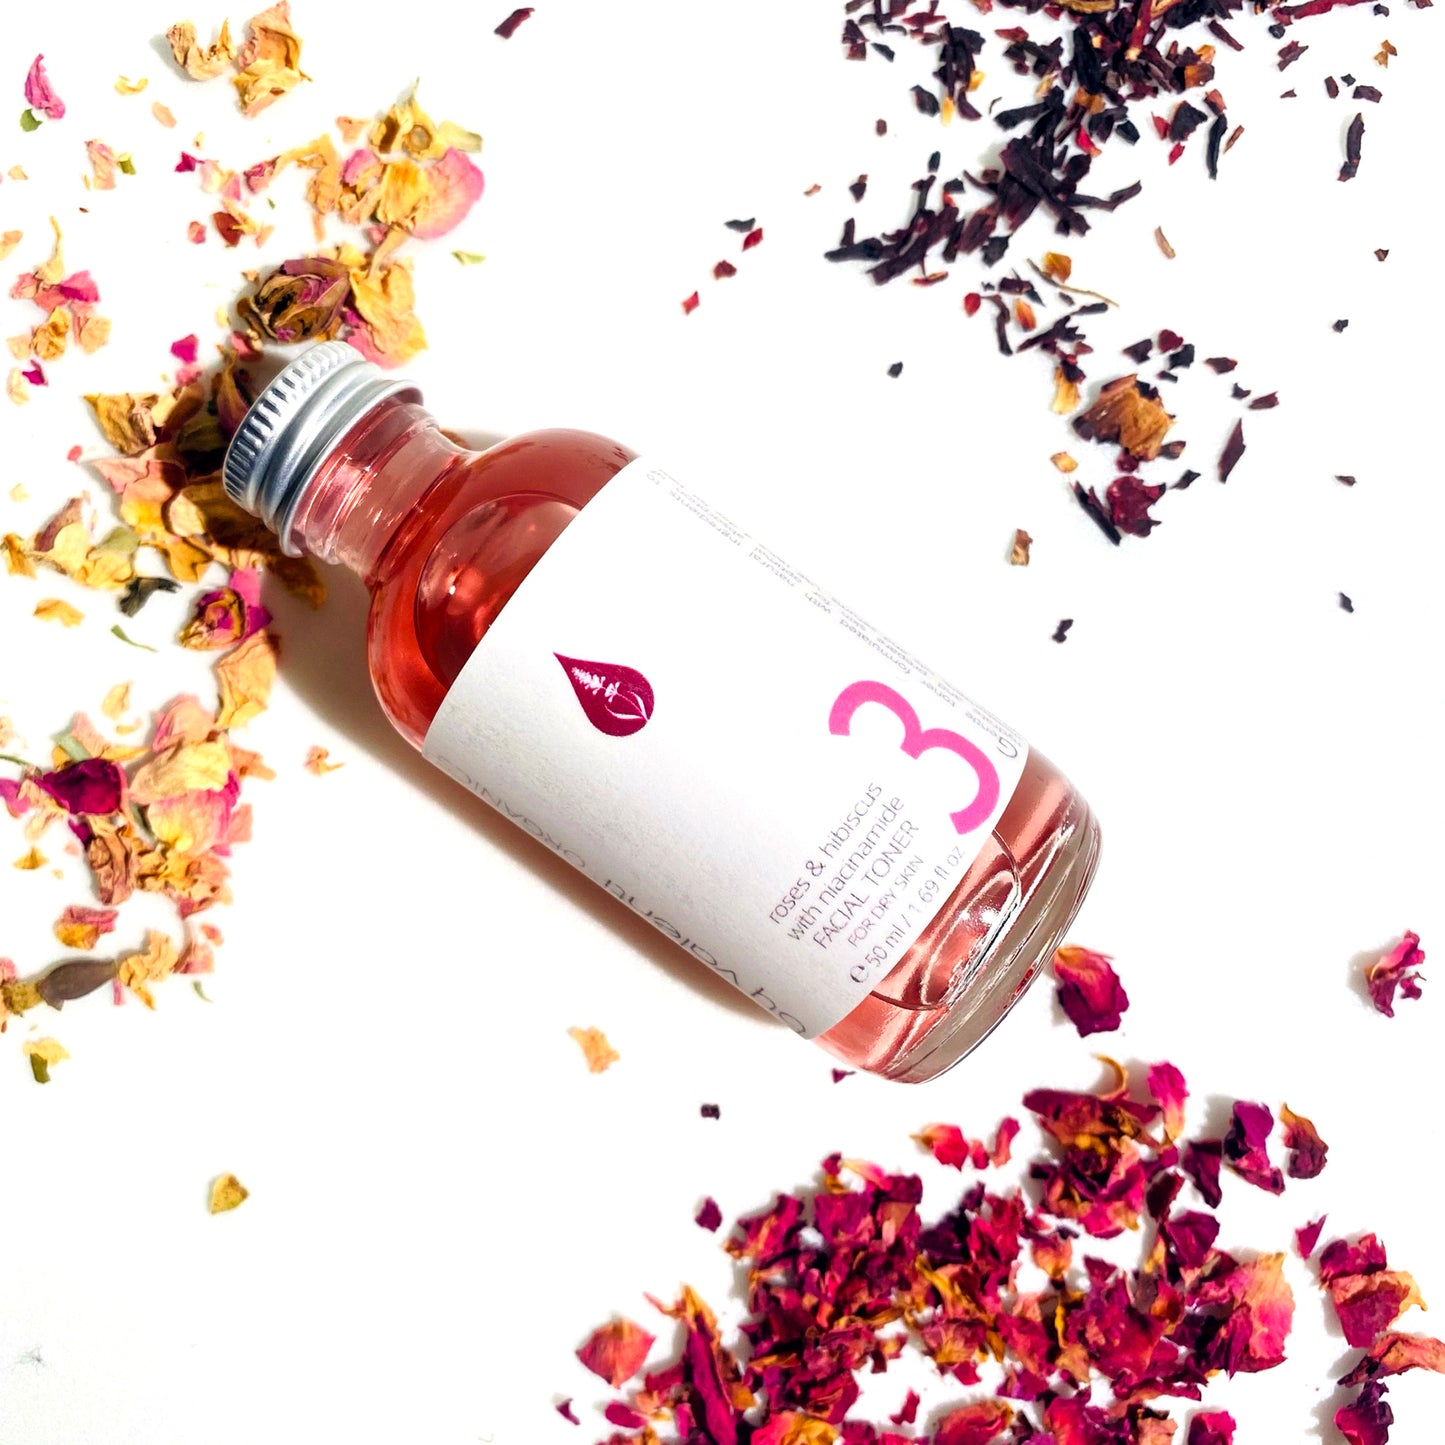 Roses & Hibiscus with Niacinamide Facial Toner for Dry Skin